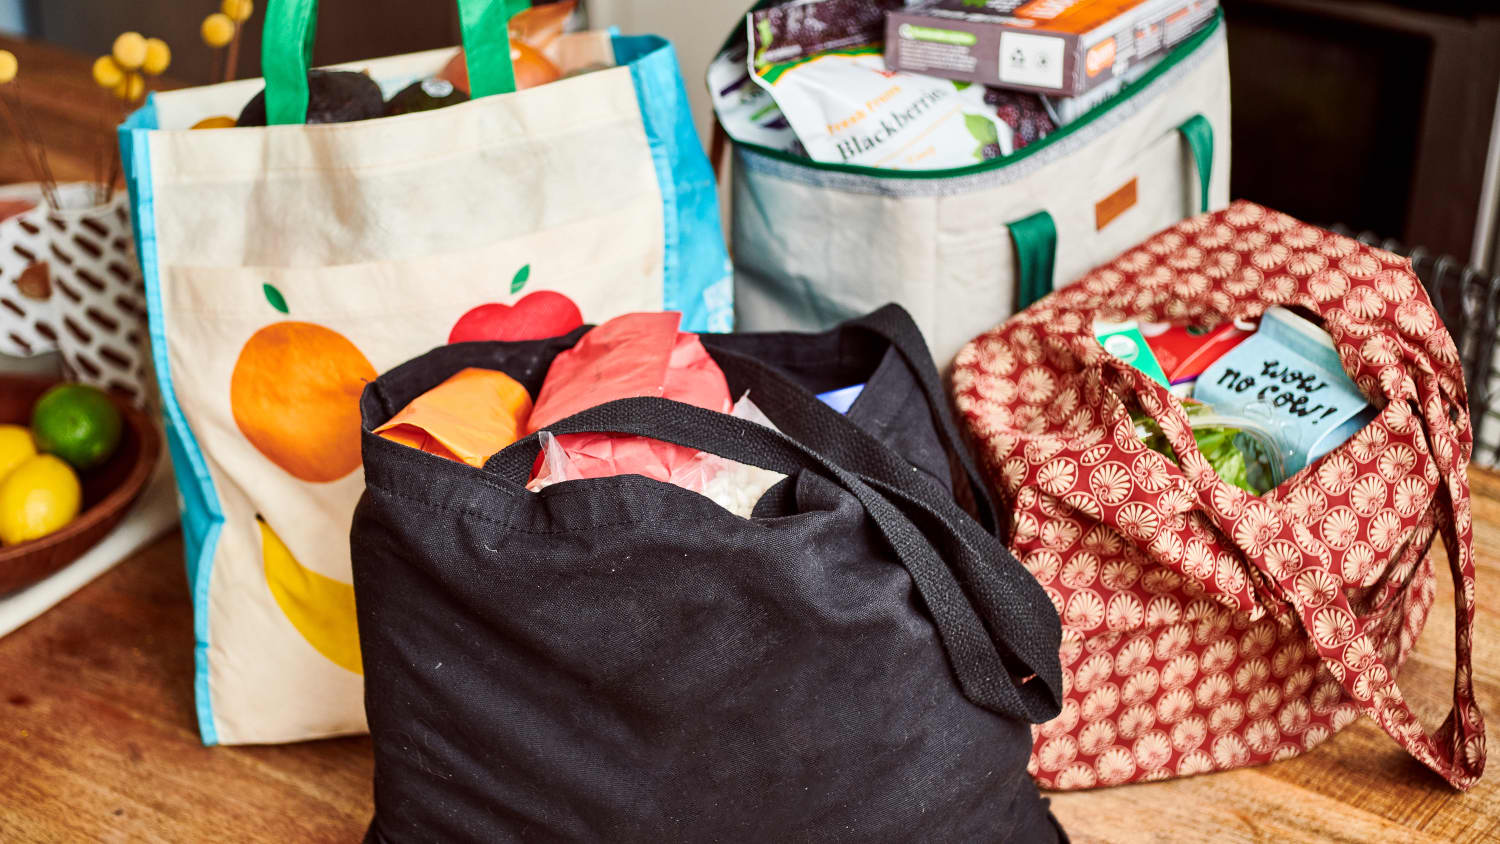 6 Things to Do with All Those Reusable Bags